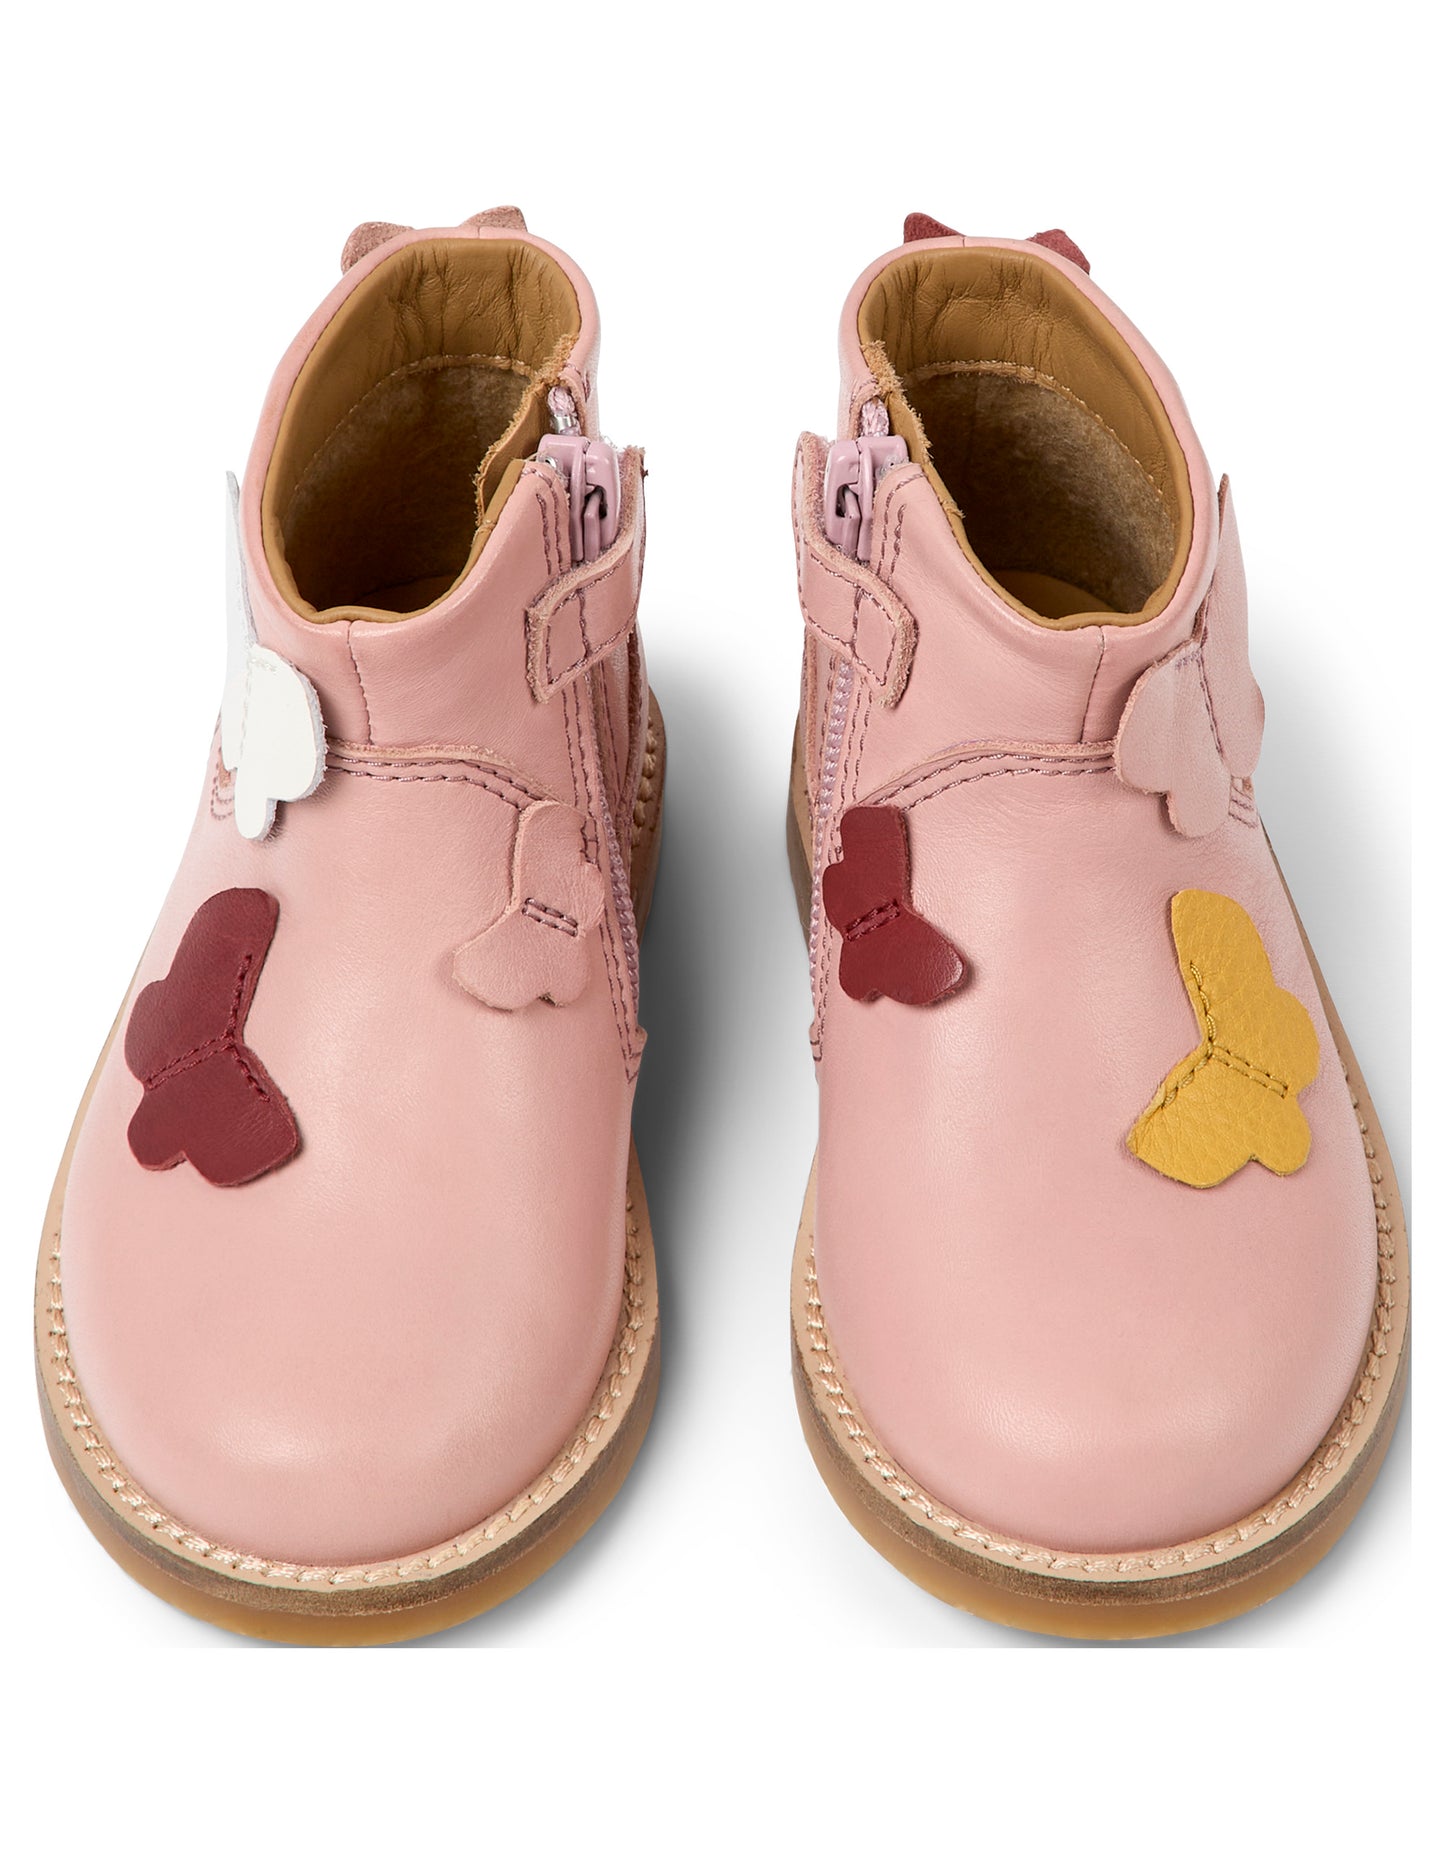 A pair of girls butterfly detail ankle boot by Camper, style K900316-001, in pink with zip fastening. Above view.